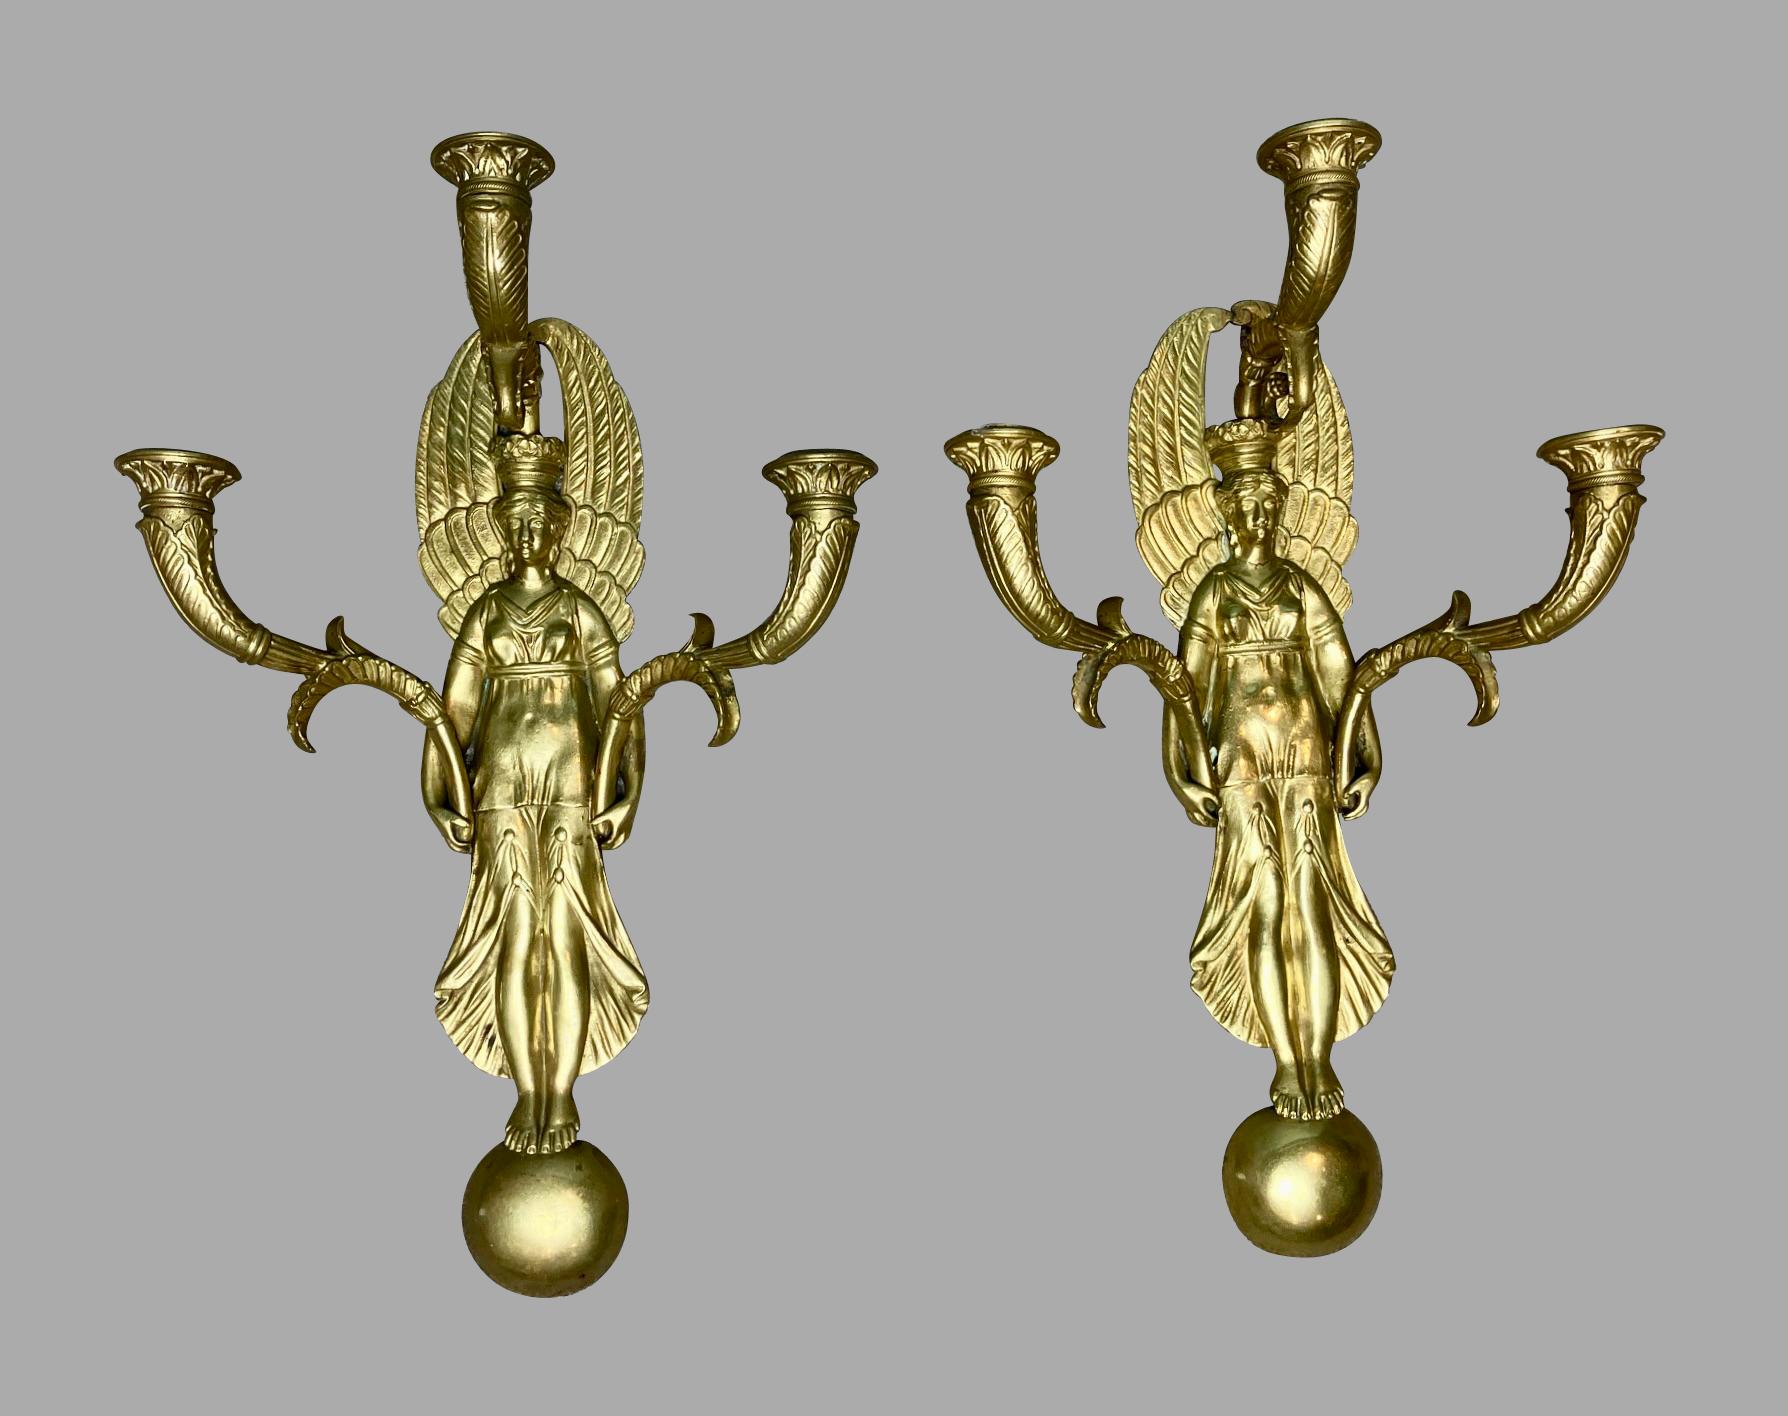 A well-cast and stylish pair of French brass or bronze 3 light wall sconces in the Empire style, each with a central female figure garbed in classical clothing and holding 2 candle branches while wearing a third central branch as a crown. She rests